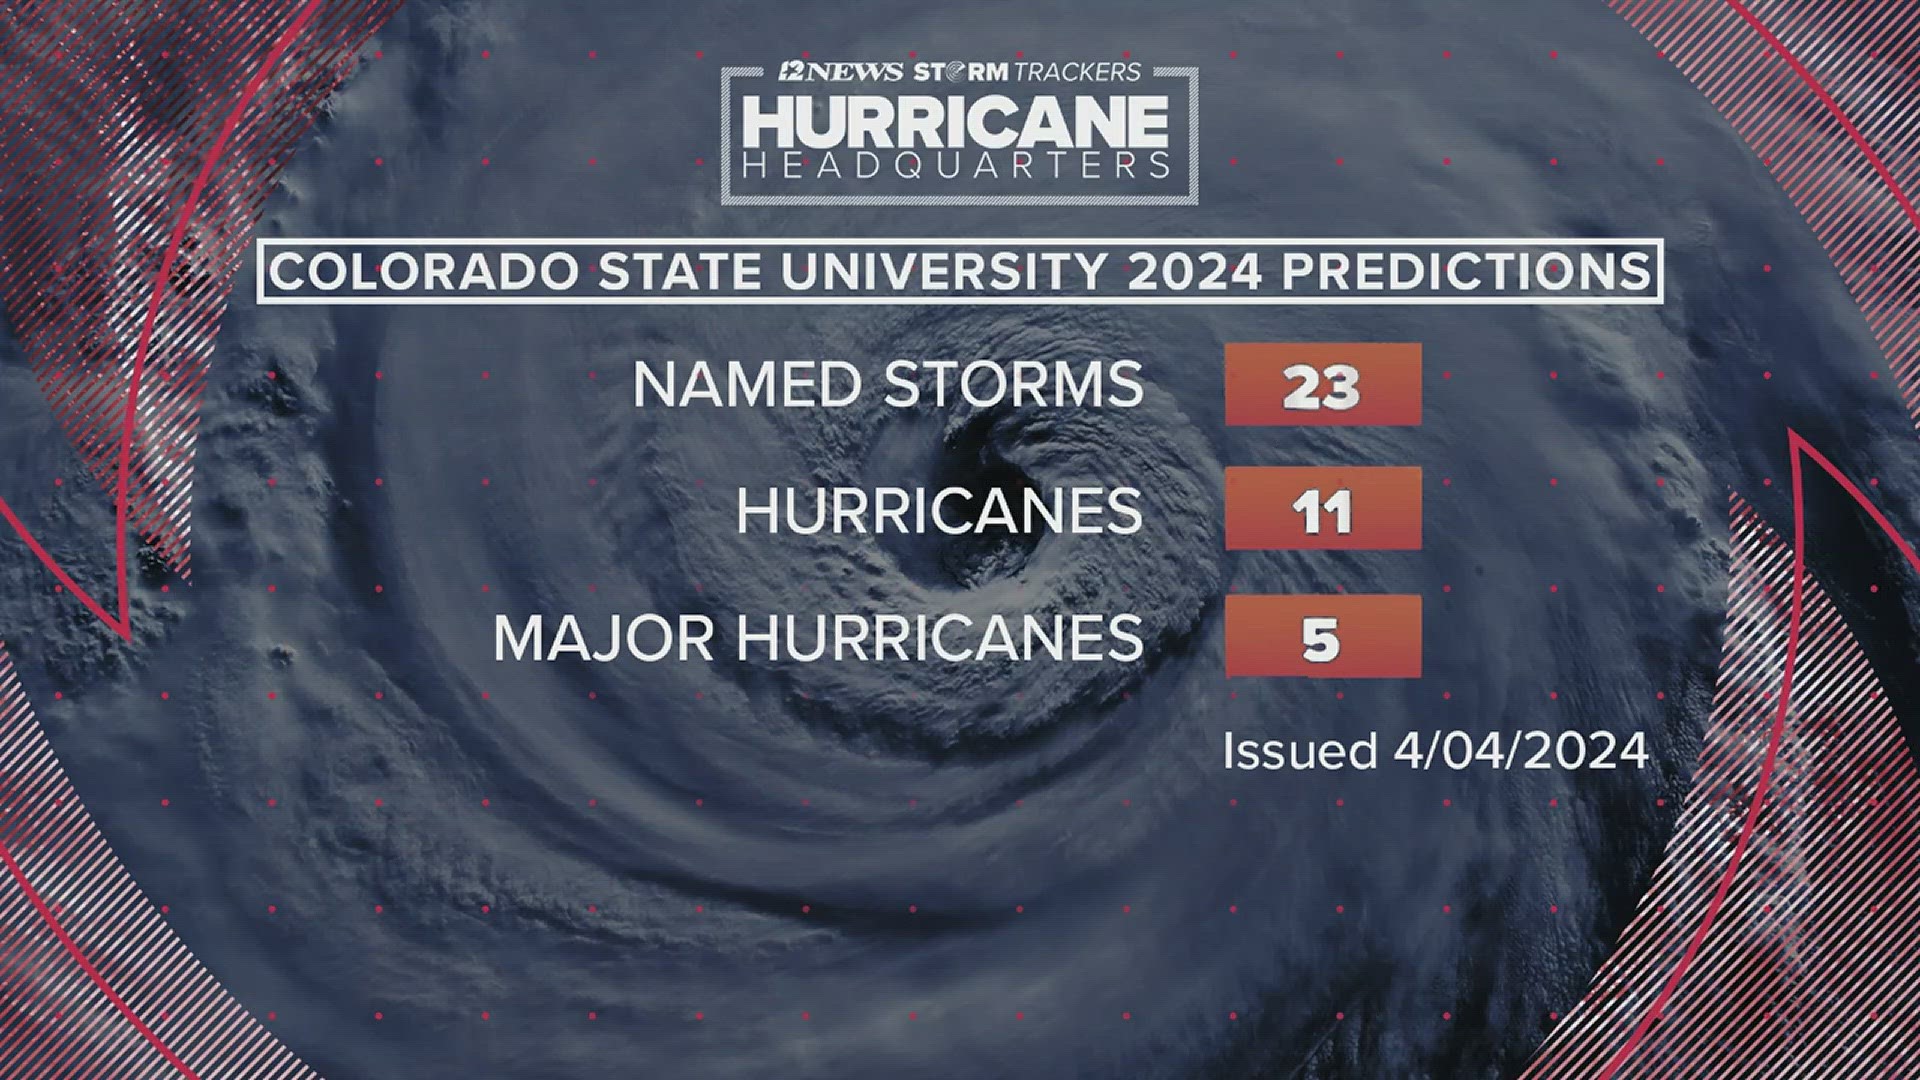 The team is predicting 23 named storms with 11 expected to become hurricanes.